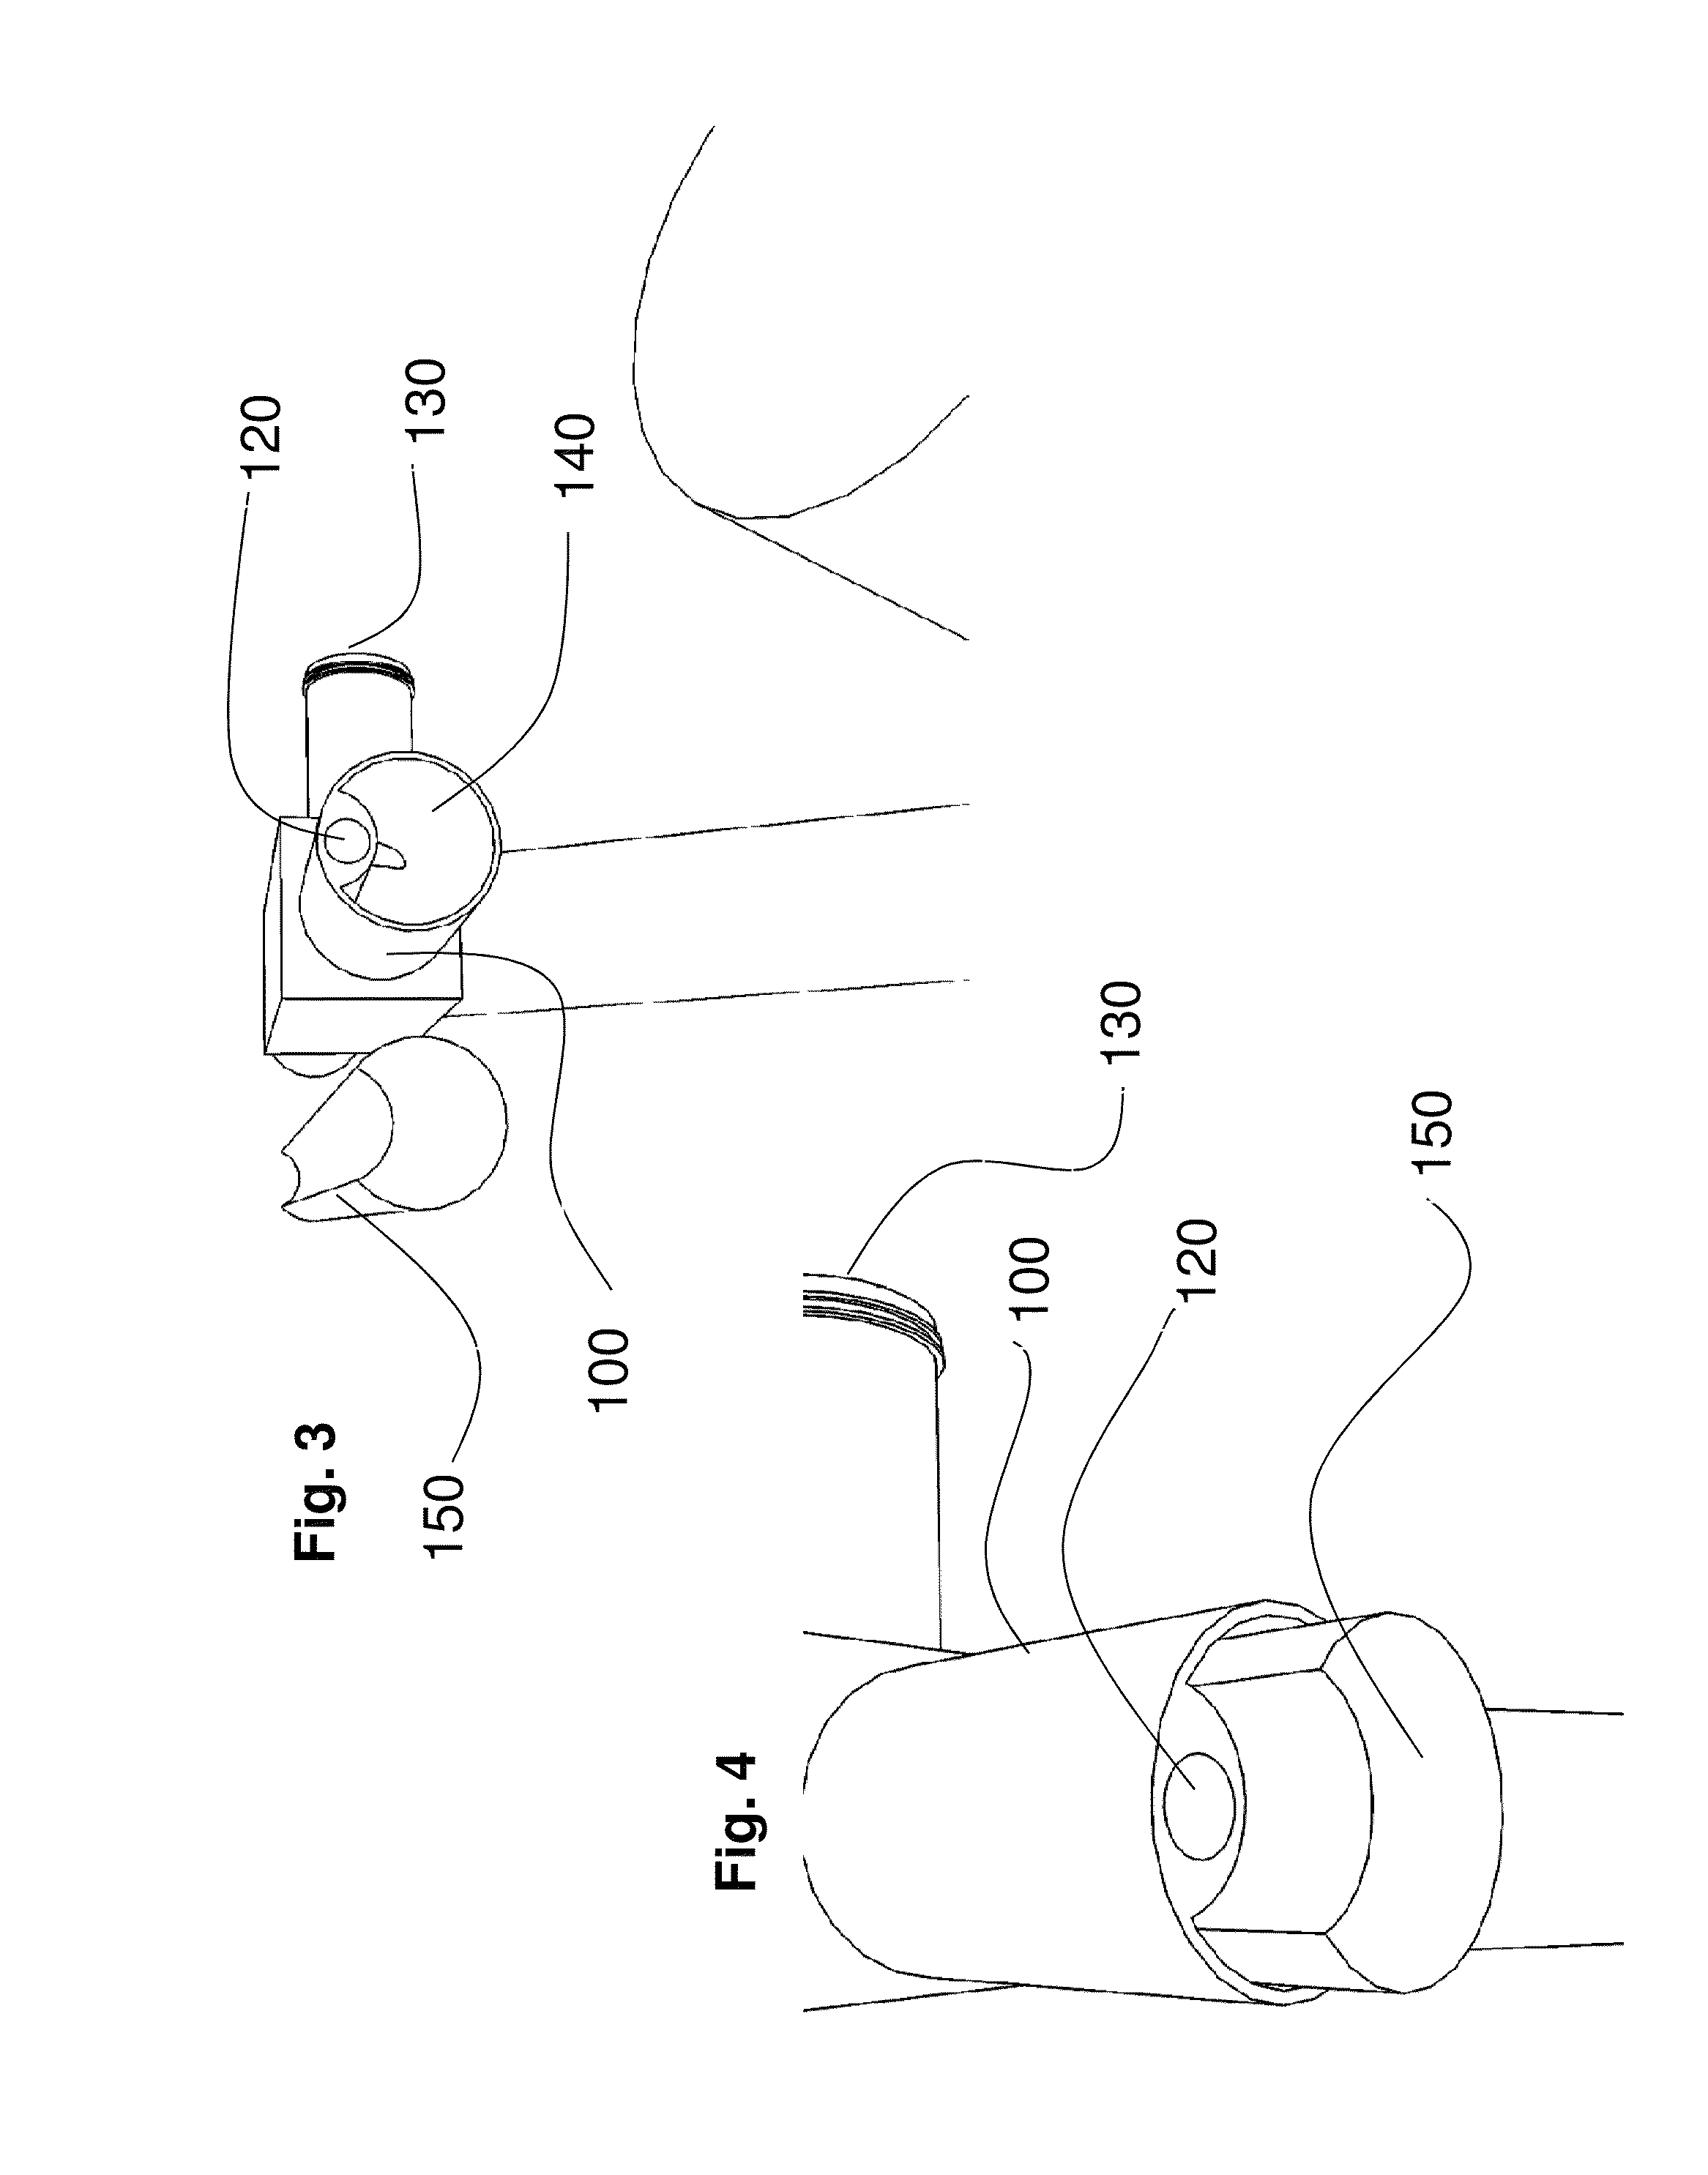 Methods and devices for laparoscopic surgery